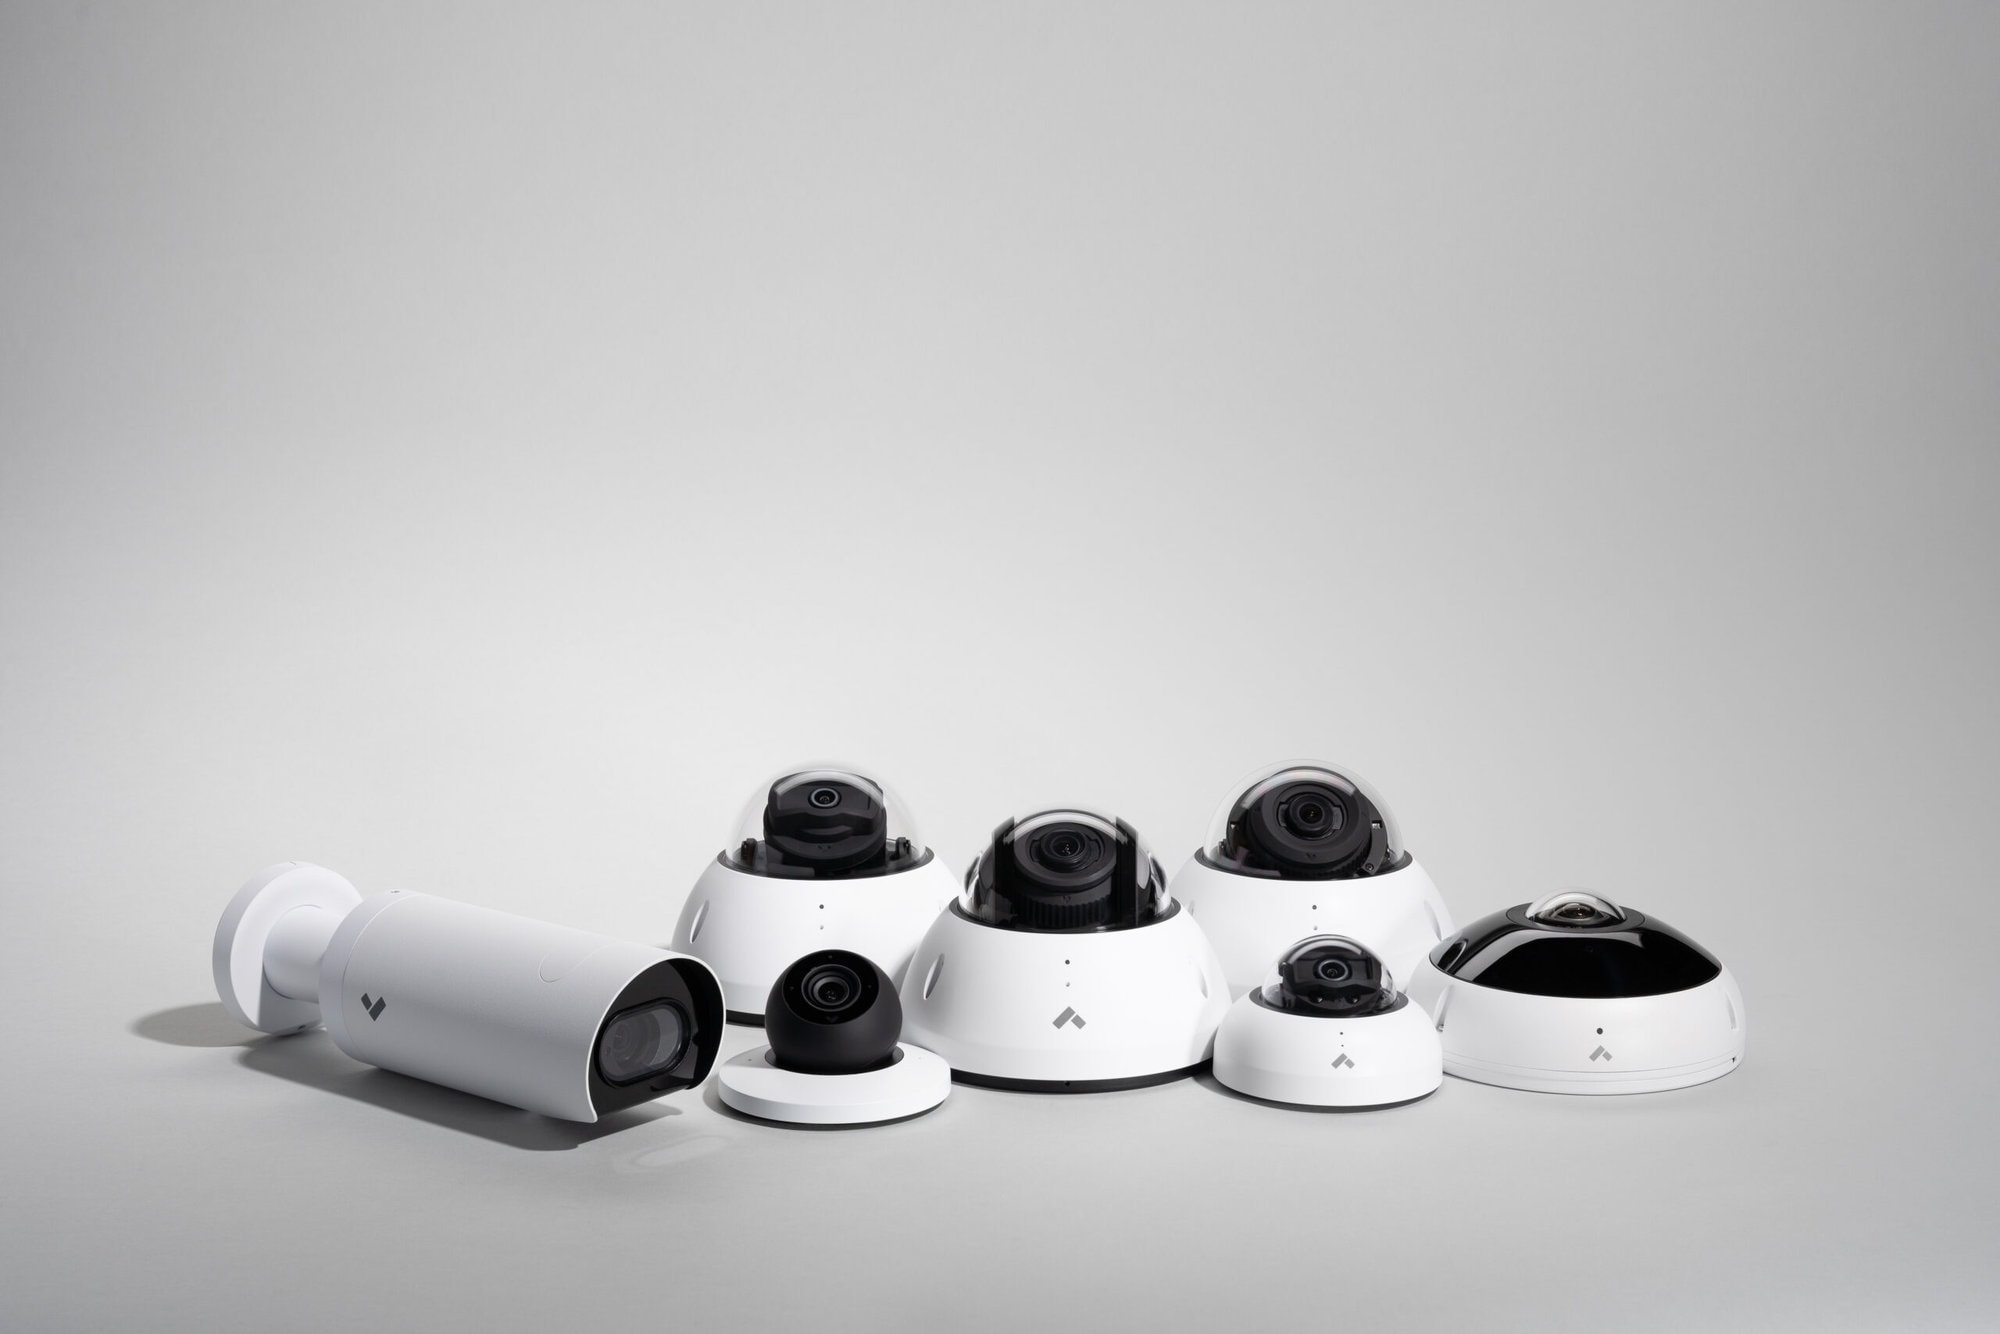 With Verkada’s cameras, there is no need to wonder, “why are security cameras so low quality” 